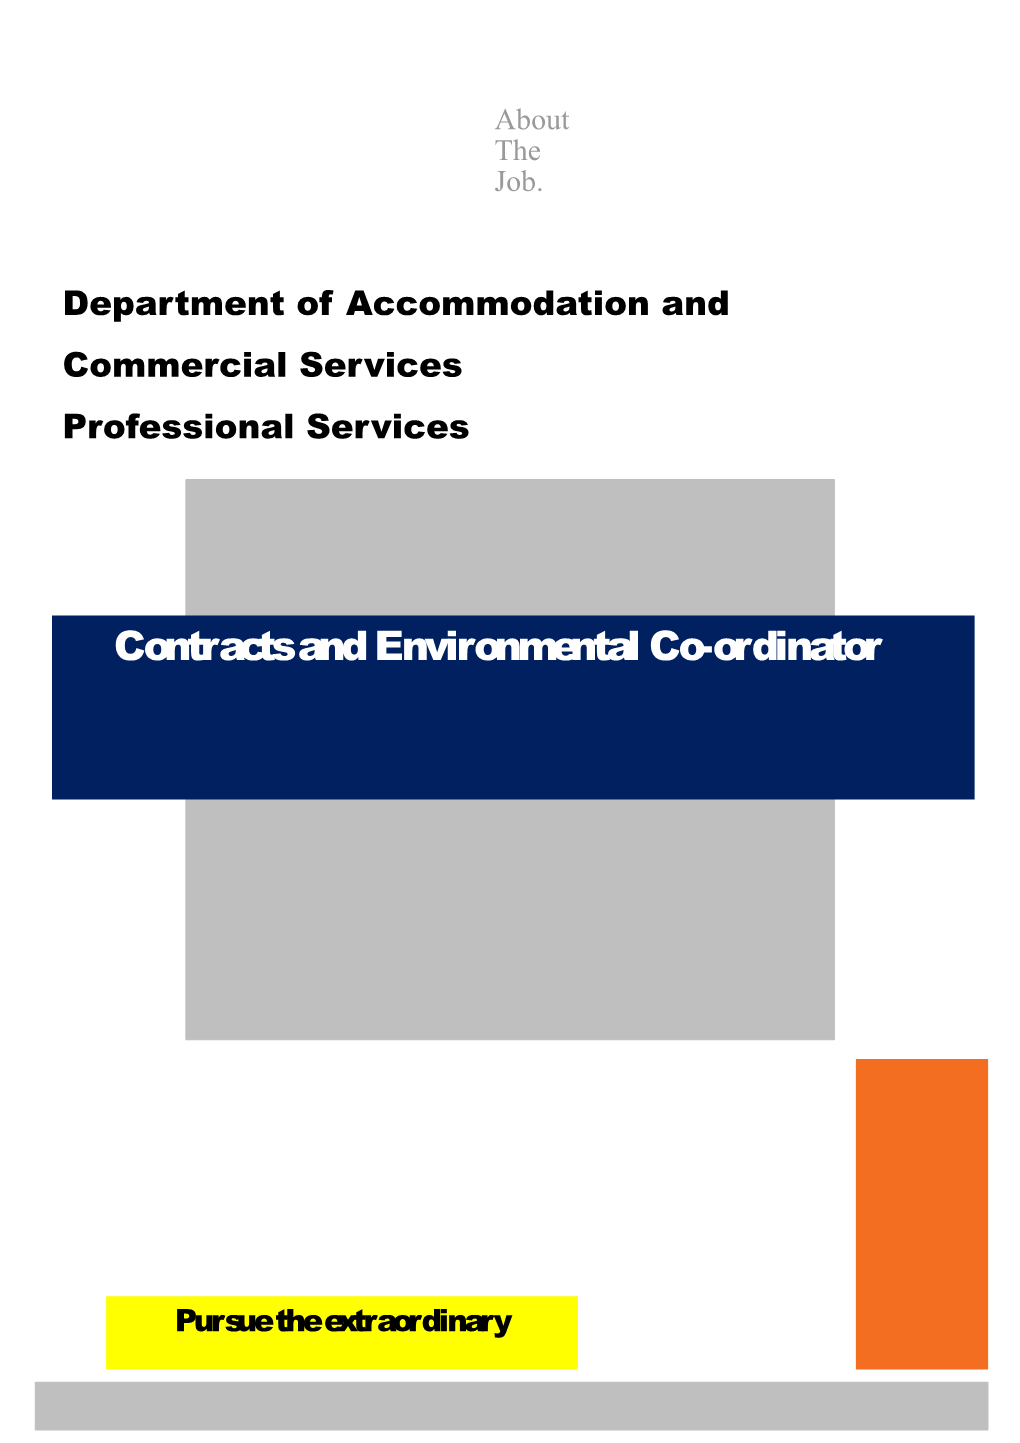 Department of Accommodation and Commercial Services